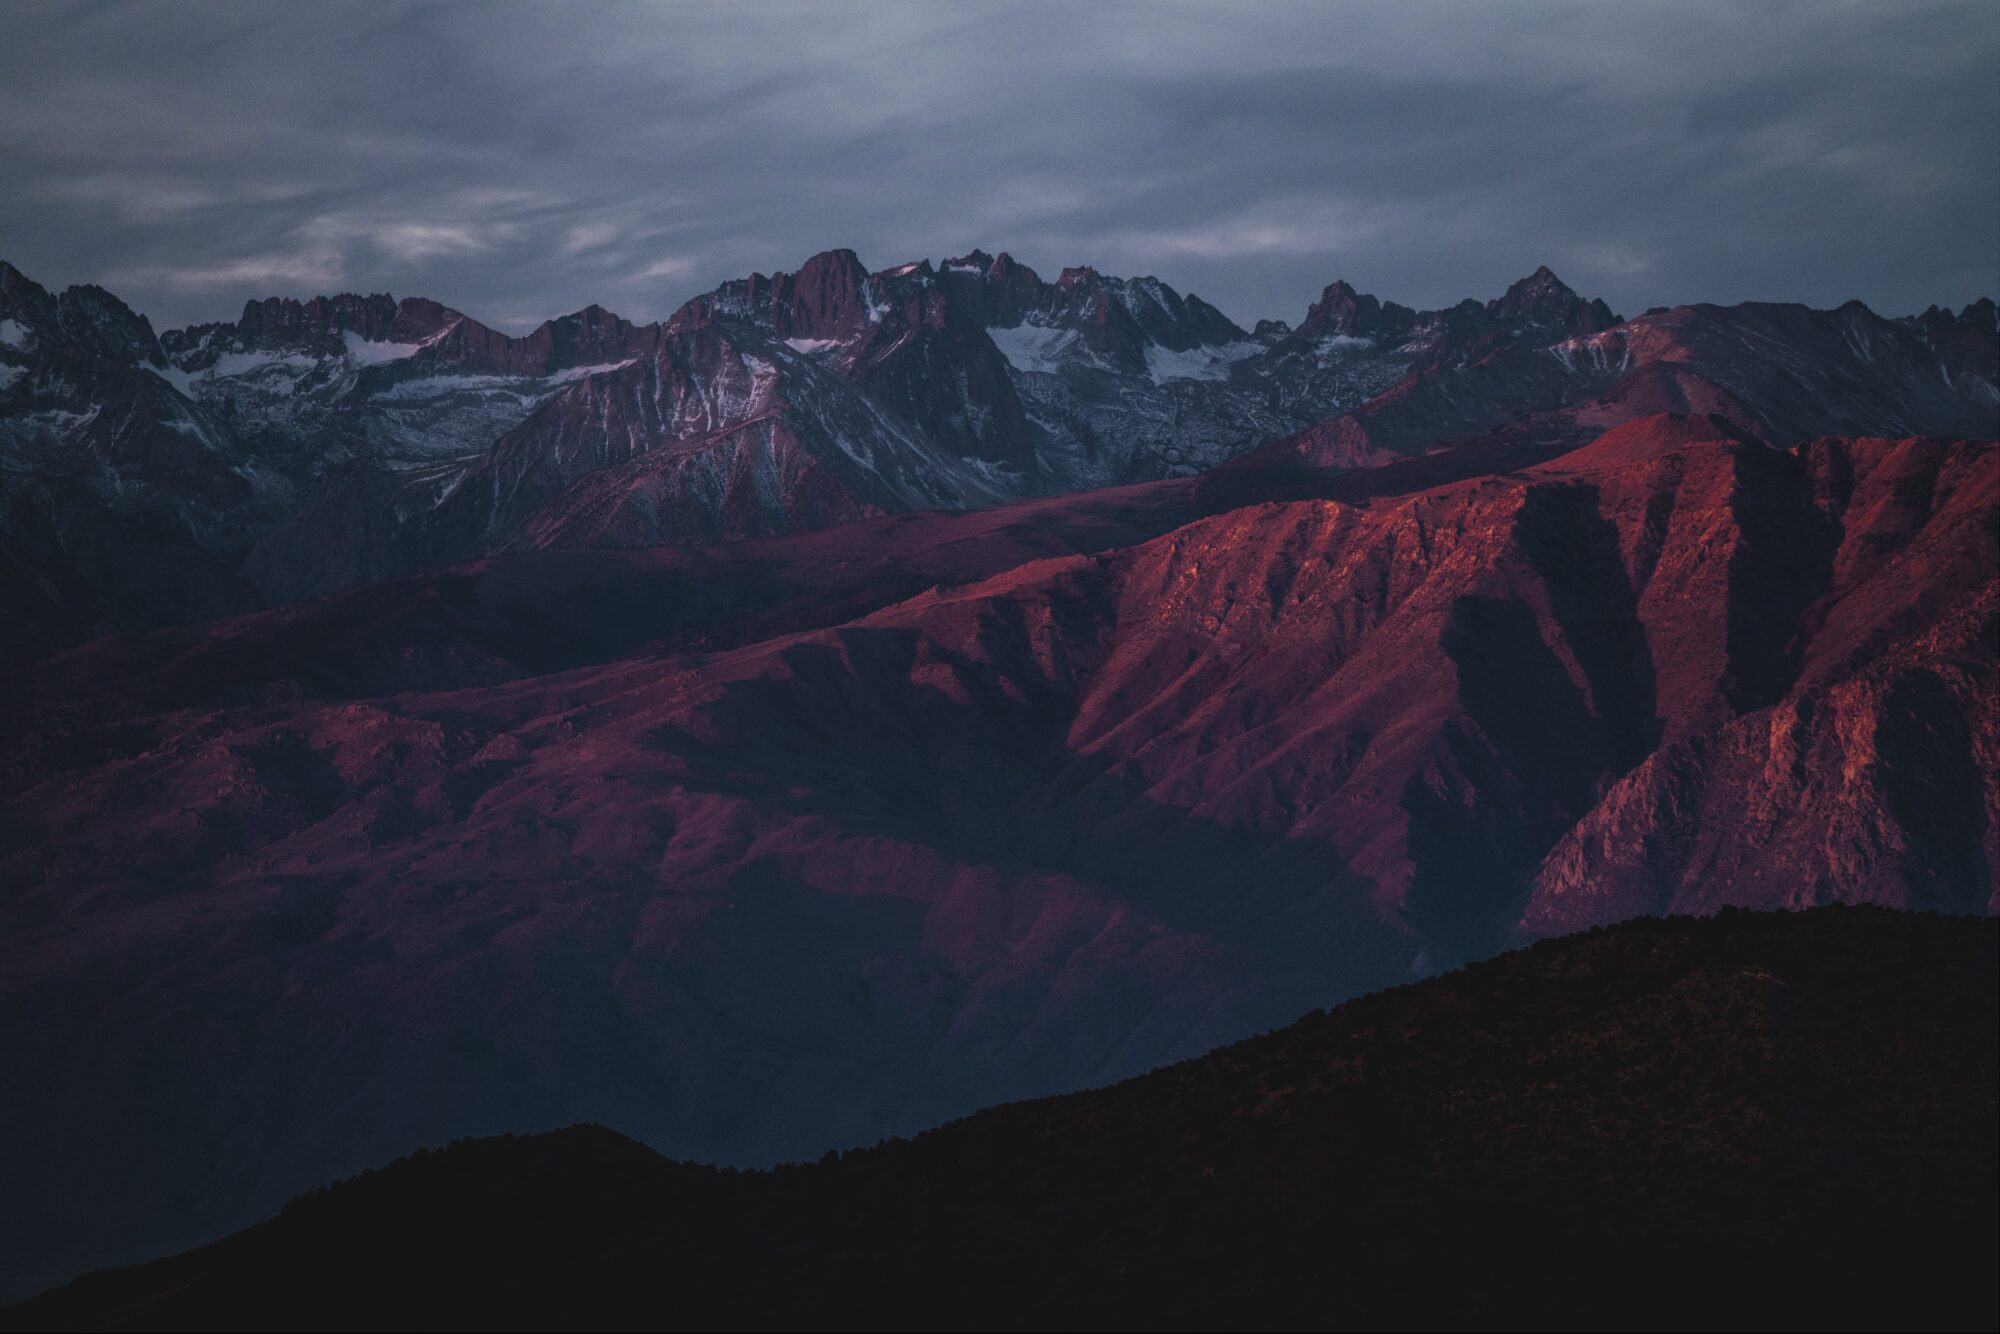 Image of mountains in the dimming evening light